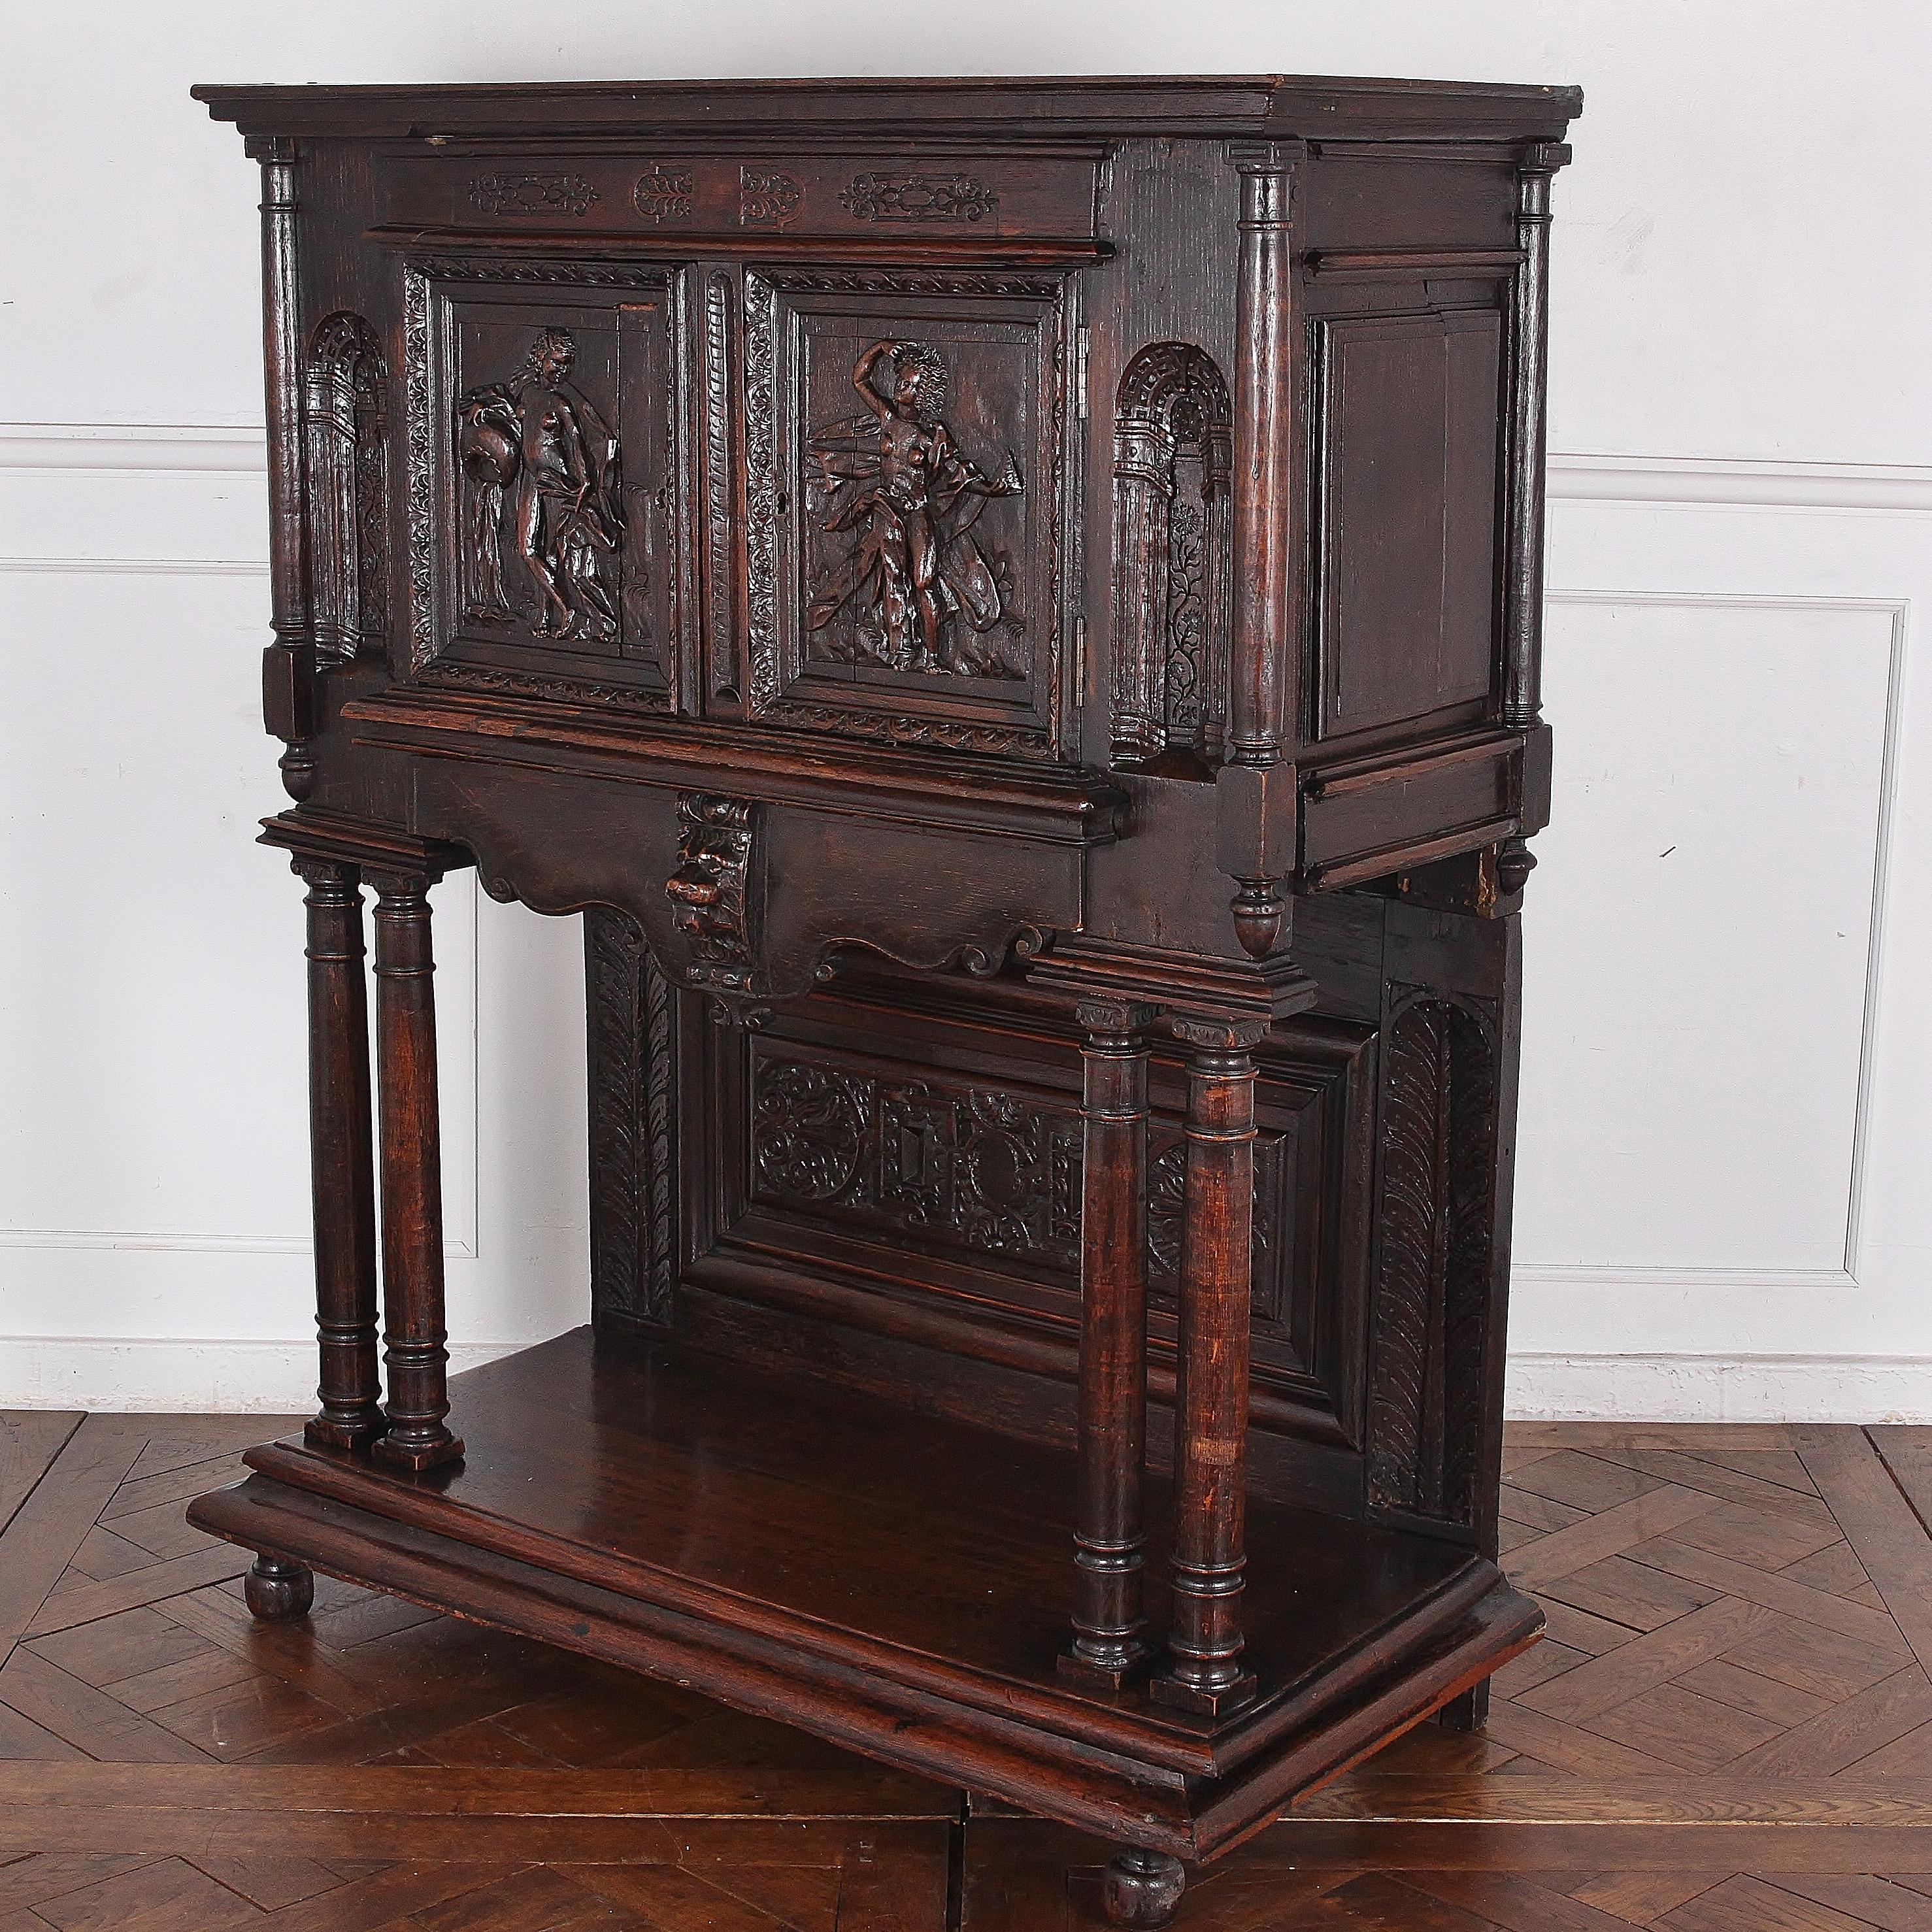 A highly-carved oak Renaissance-revival cabinet on stand, the top with figural carving to the doors, the doors flanked with trompe l’oiel carved arcades, the whole raised on double-column supports over a boldly-molded lower shelf with turned bun